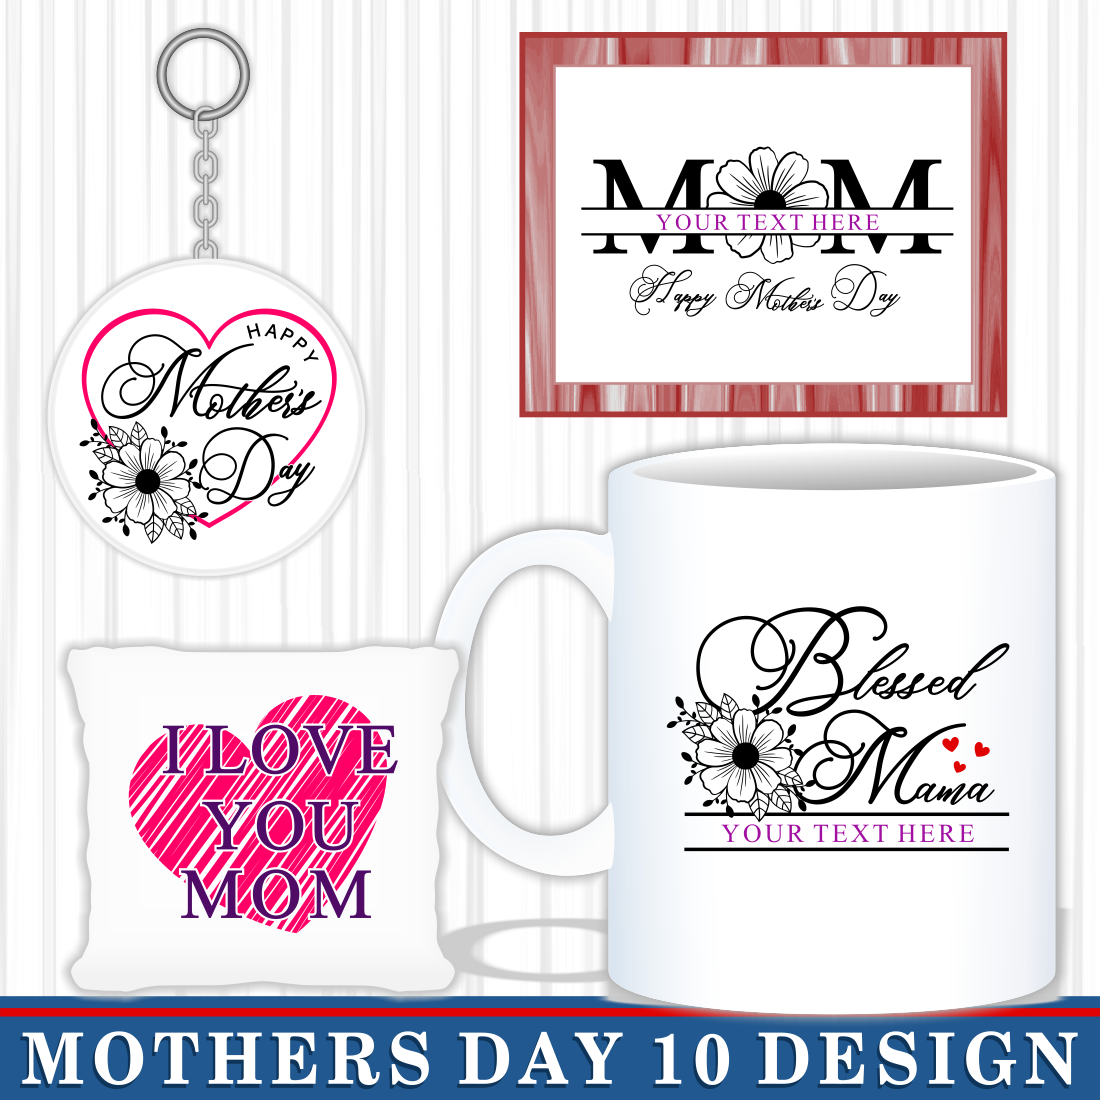 Mothers Day SVG Bundle, Mothers Day Sublimation Bundle, Quotes, Inspirational, Motivational, Mom, Sayings, Mother, Mama, Mum, Mommy, Sign, Signs, Split monogram, split, mom split, SVG File, Mom Bundle, Split Monogram, Love, I Love You, Heart, Flowers SVG, Happy Mother's Day, Keychain SVG Designs, Mug Sublimation Designs, Bundle, Sublimation, SVG Design, Designs cover image.